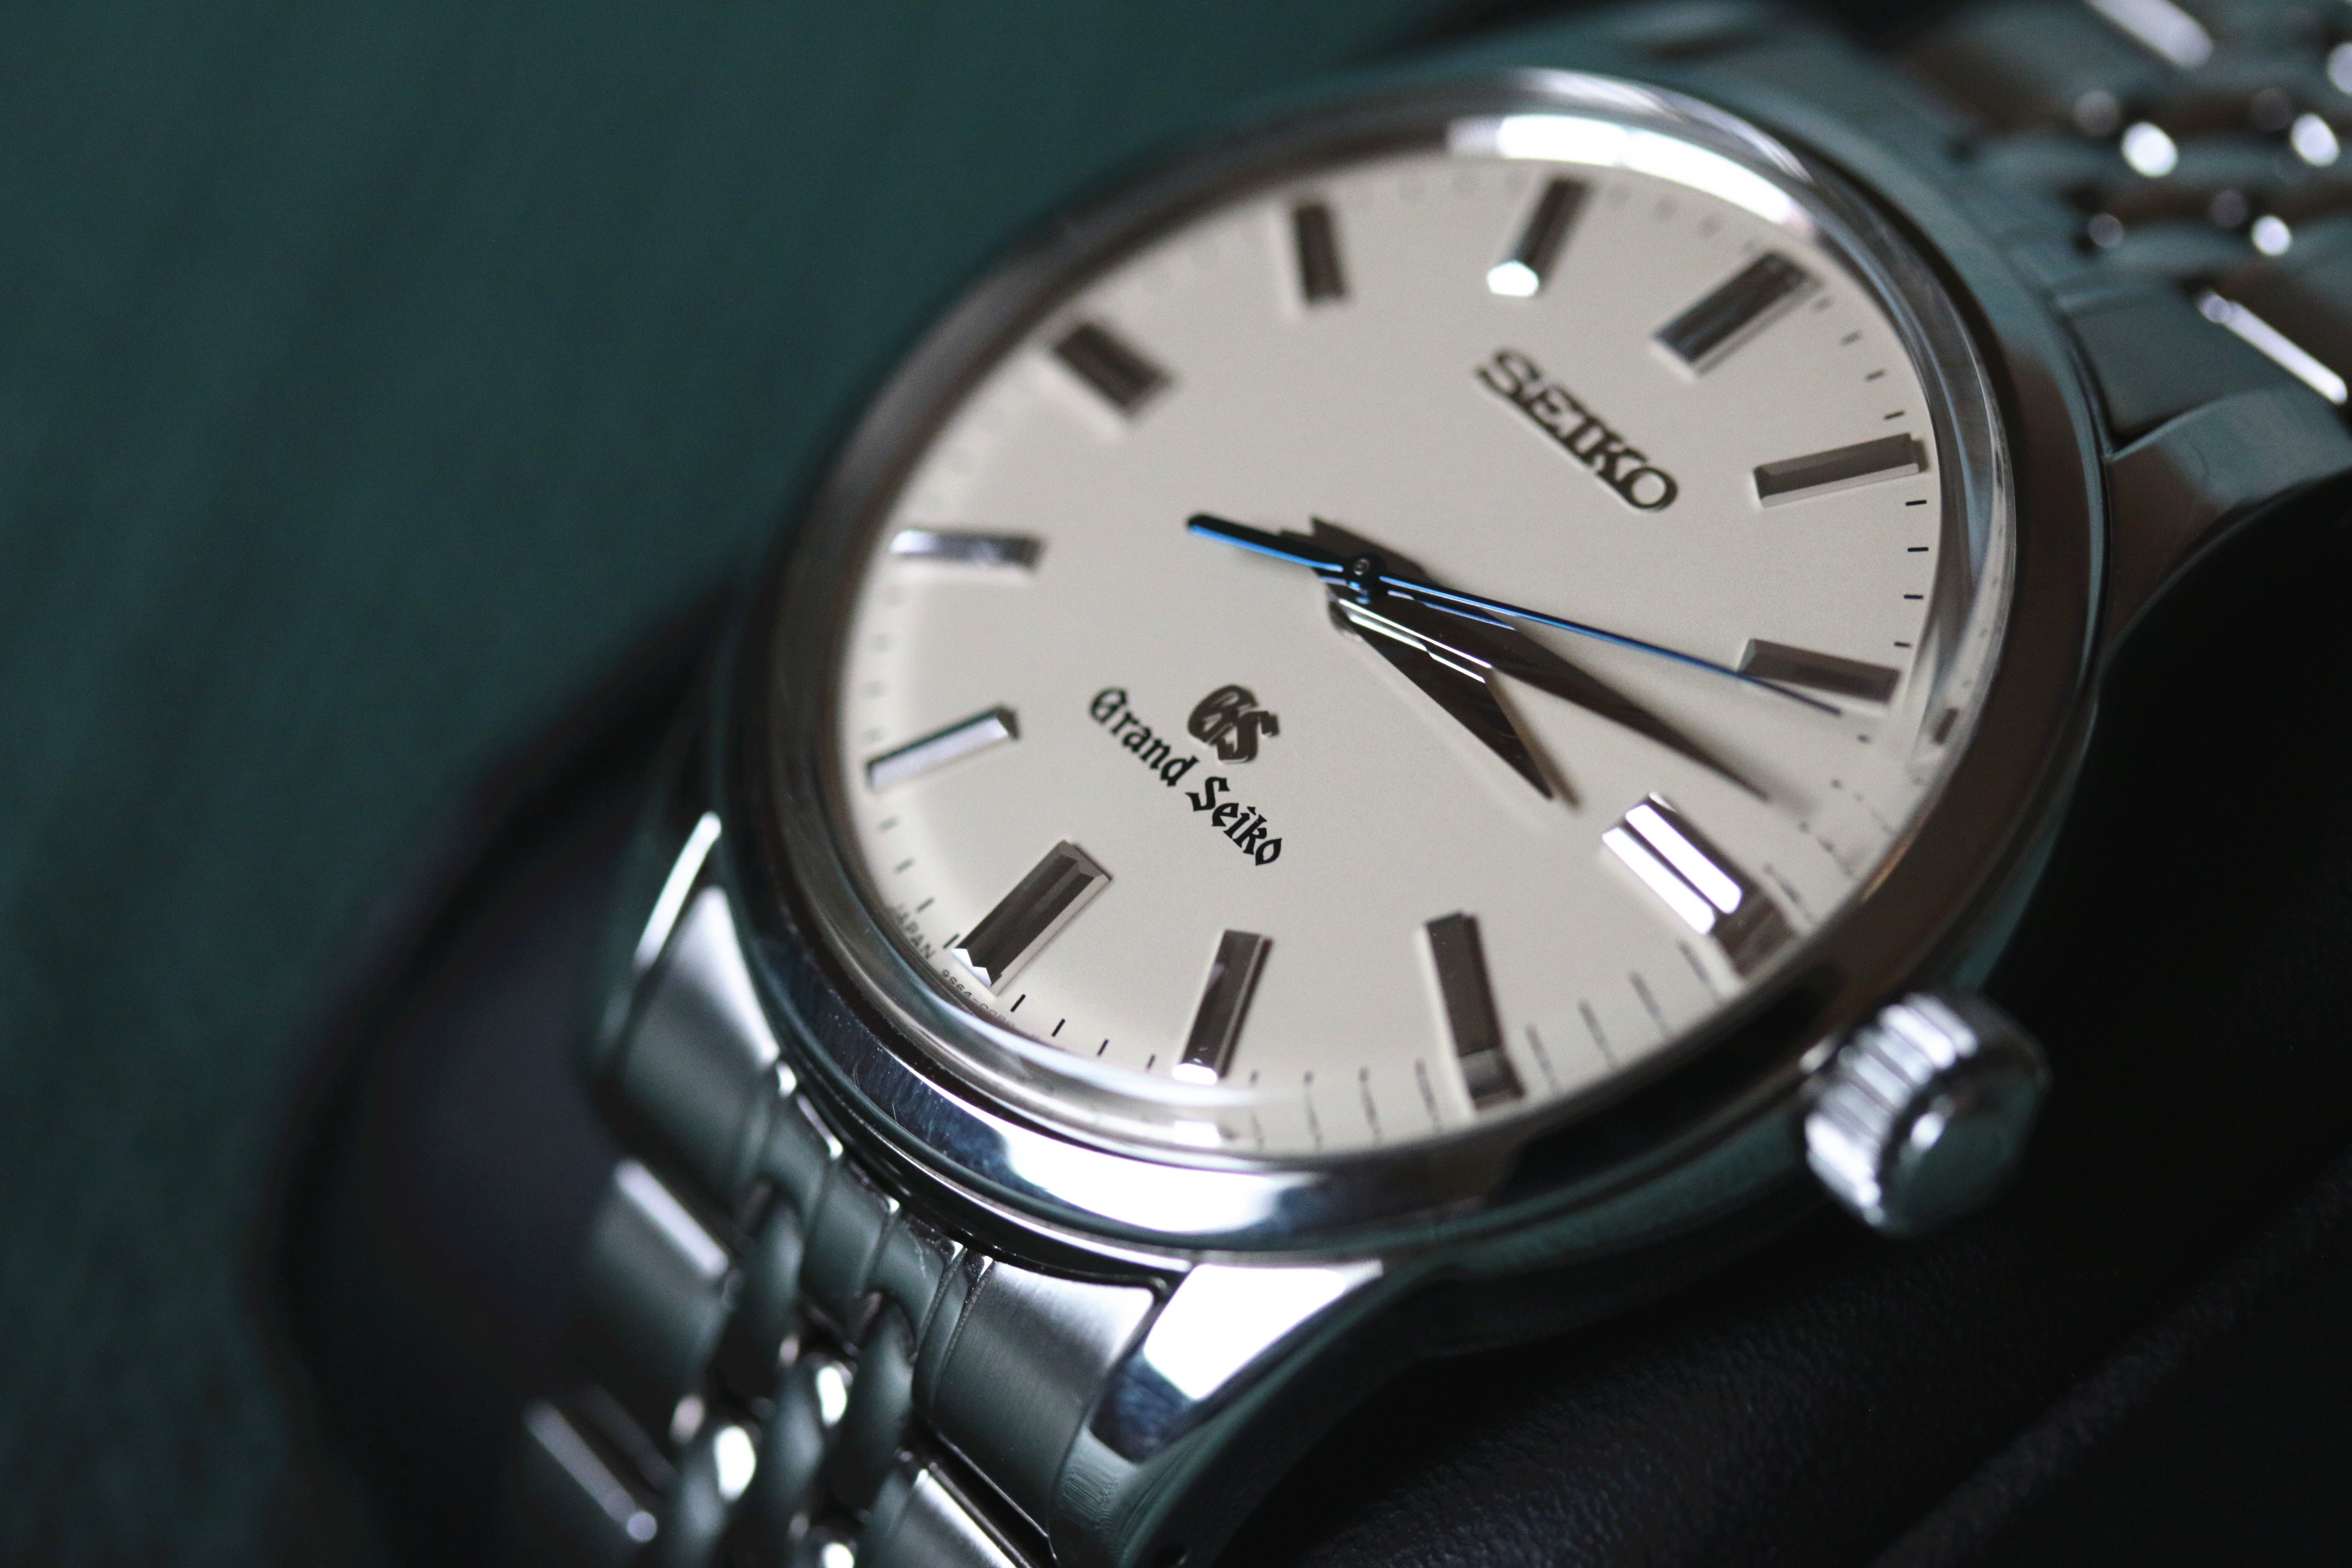 SOLD - 2012 Grand Seiko SBGW035 in Full Set | Omega Forums